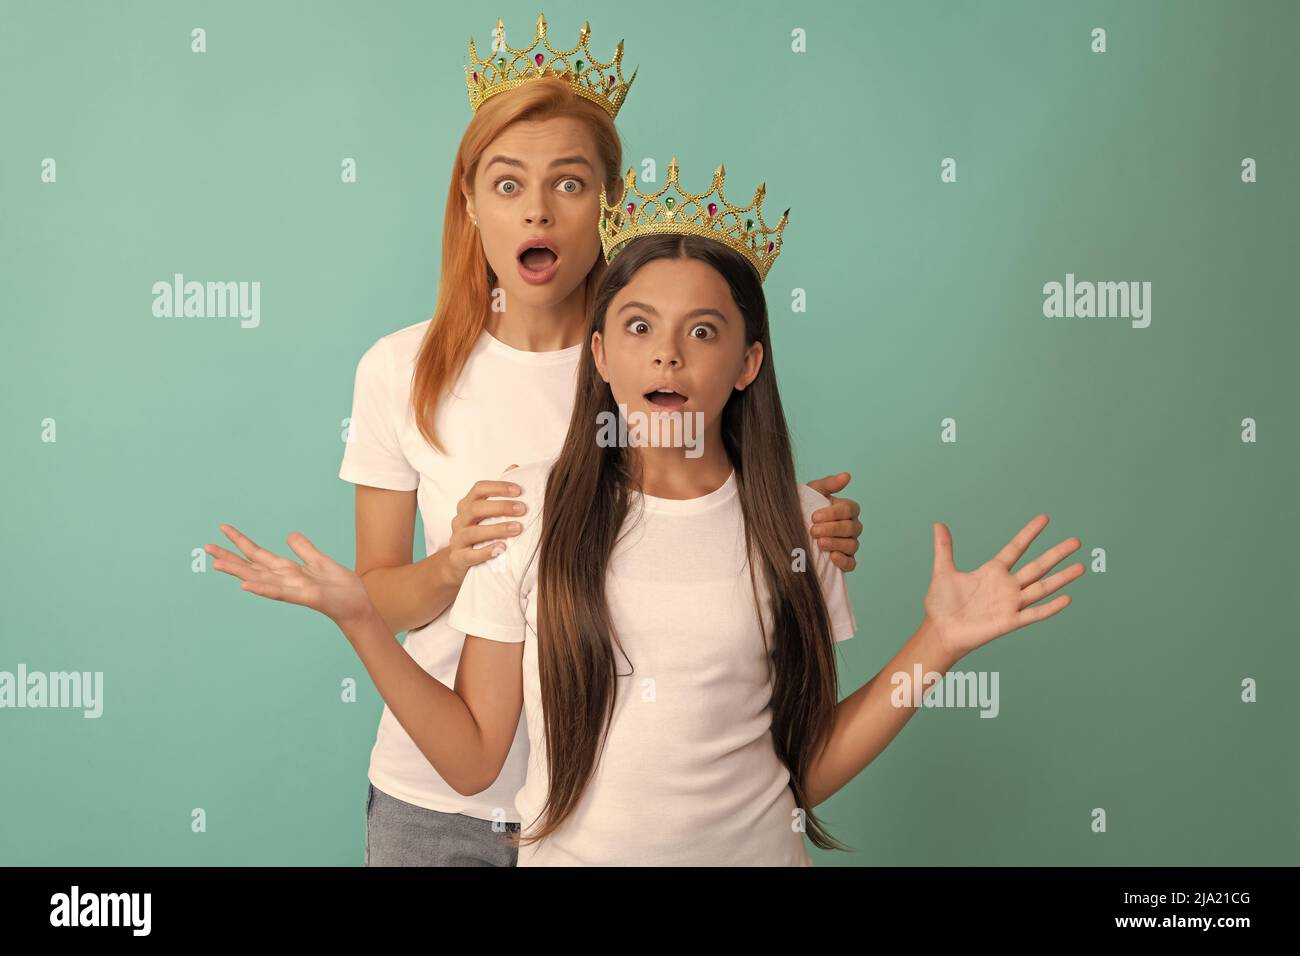 Surprised wide-eyed selfish woman and girl child wear crowns blue background, shock Stock Photo